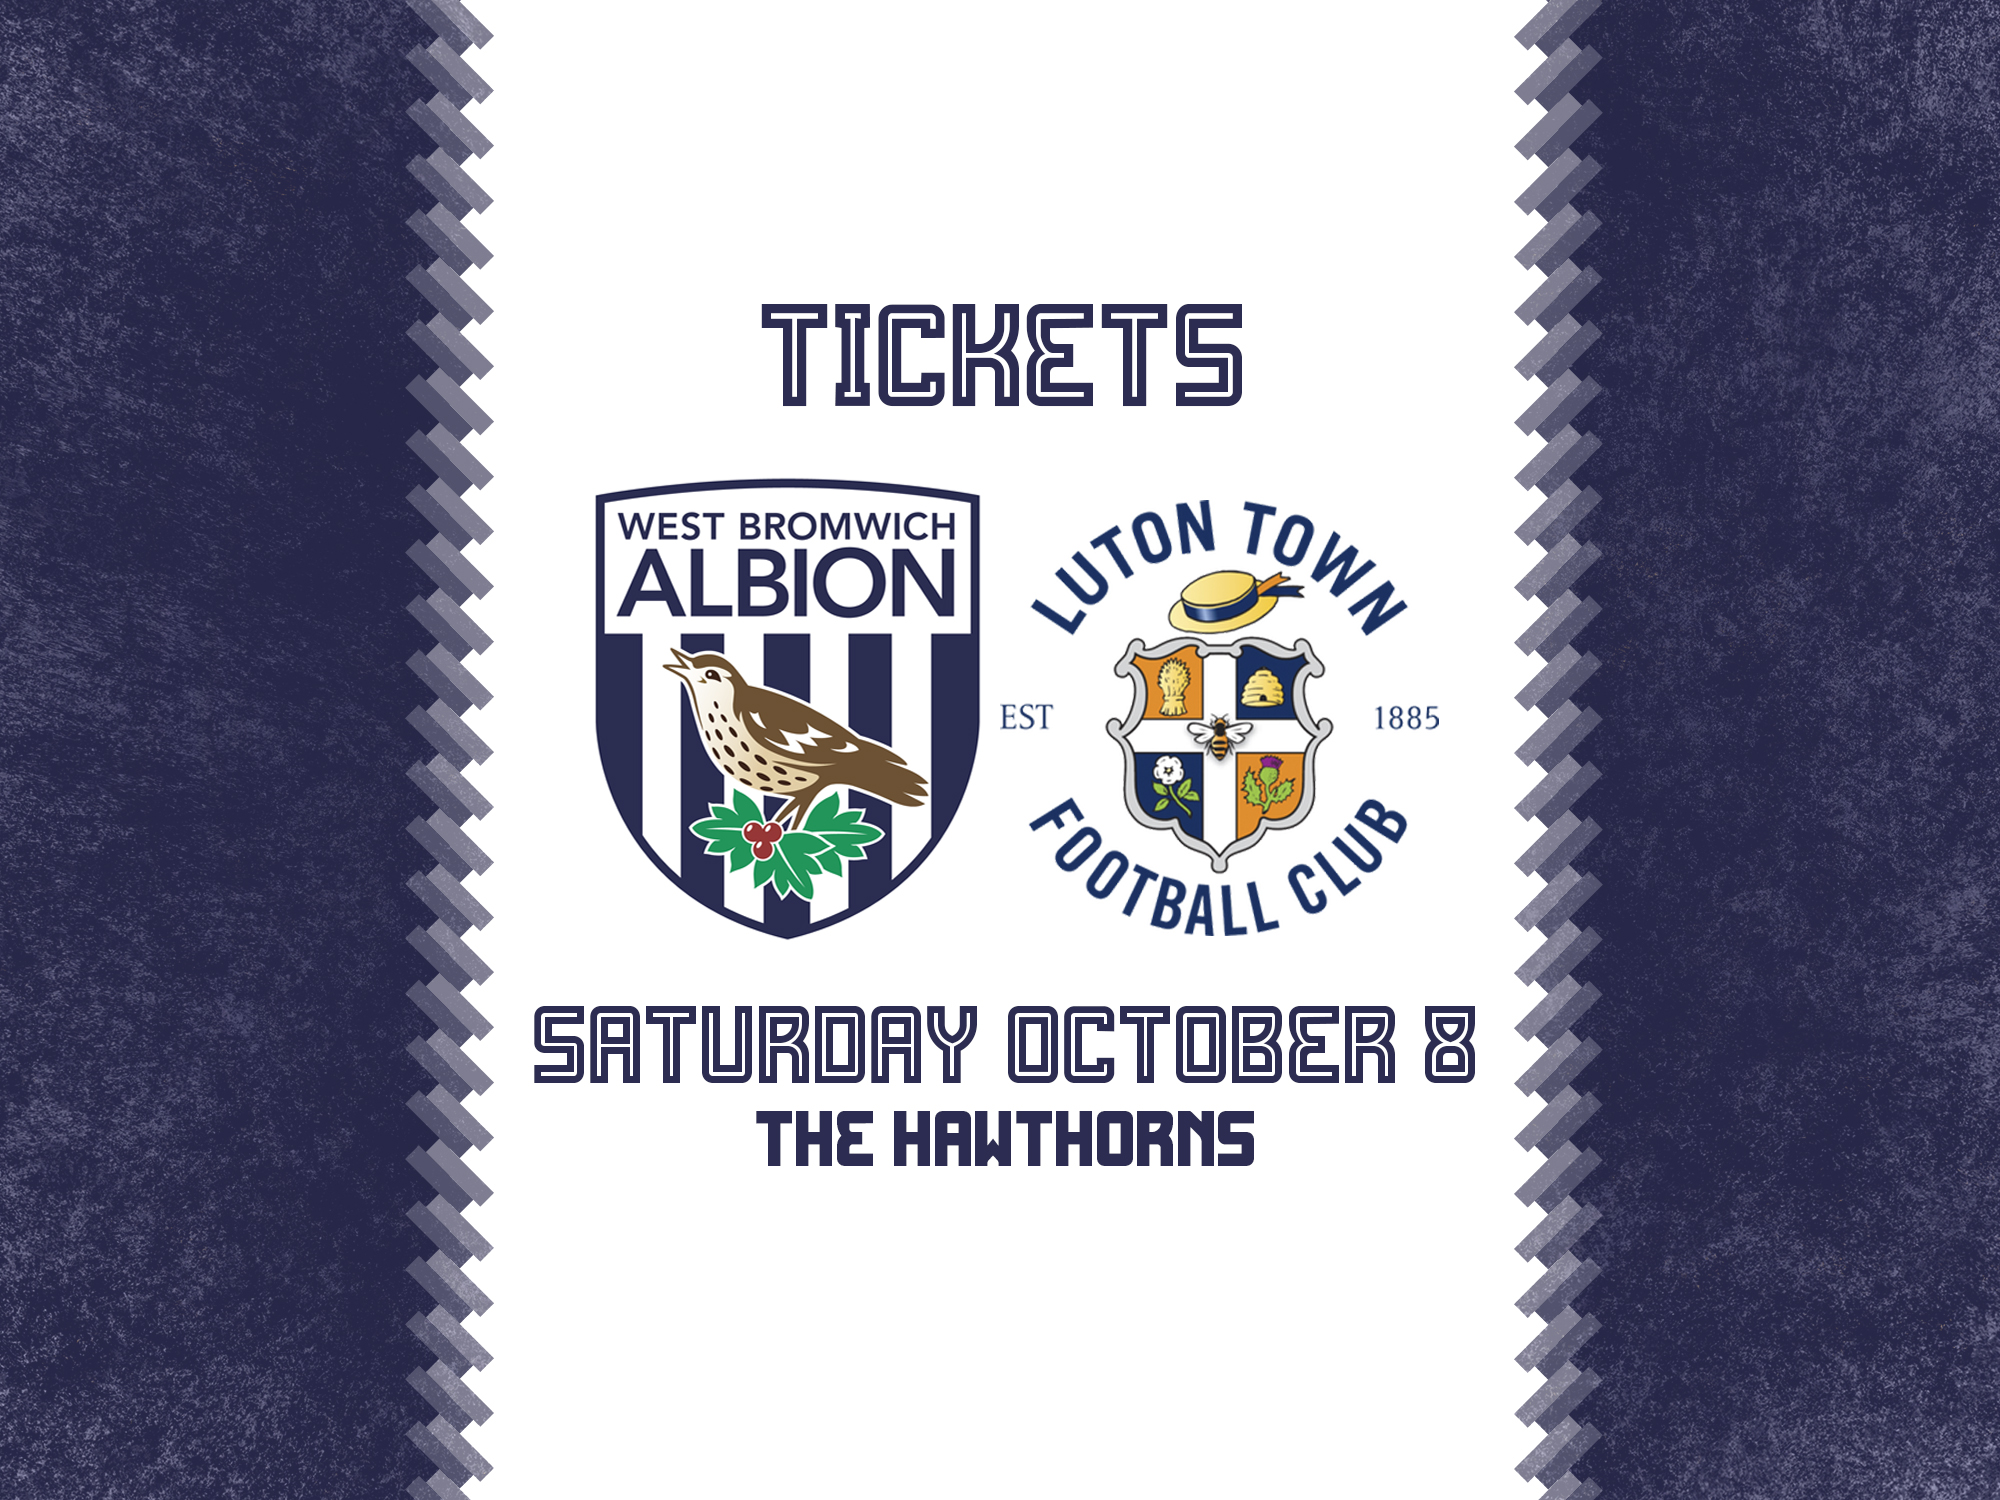 Tickets for Albion's game against Luton are on general sale